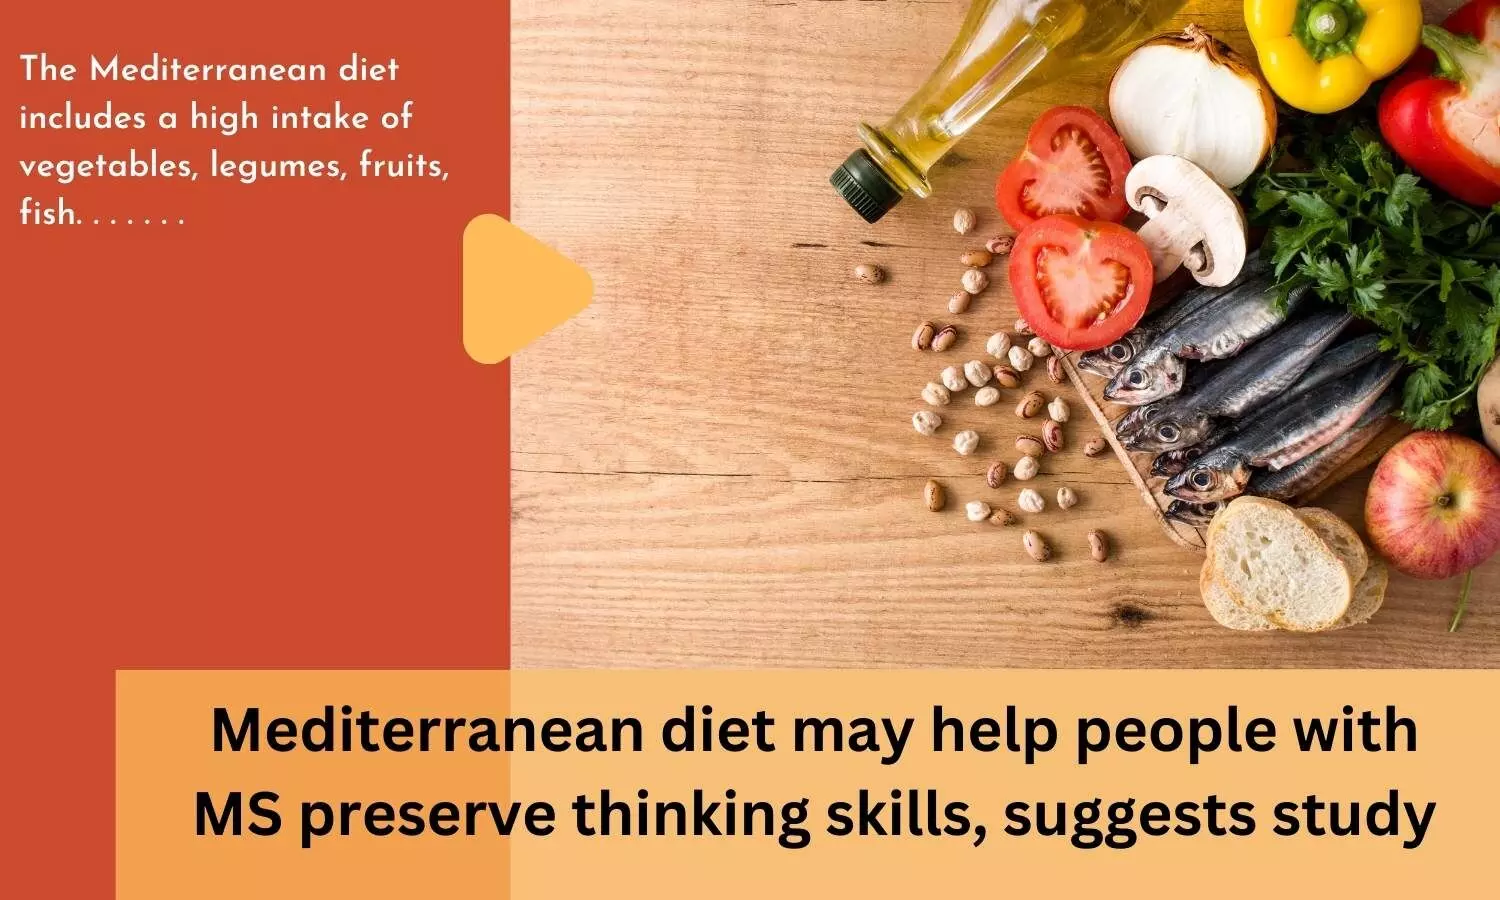 Mediterranean diet may help people with MS preserve thinking skills, suggests study